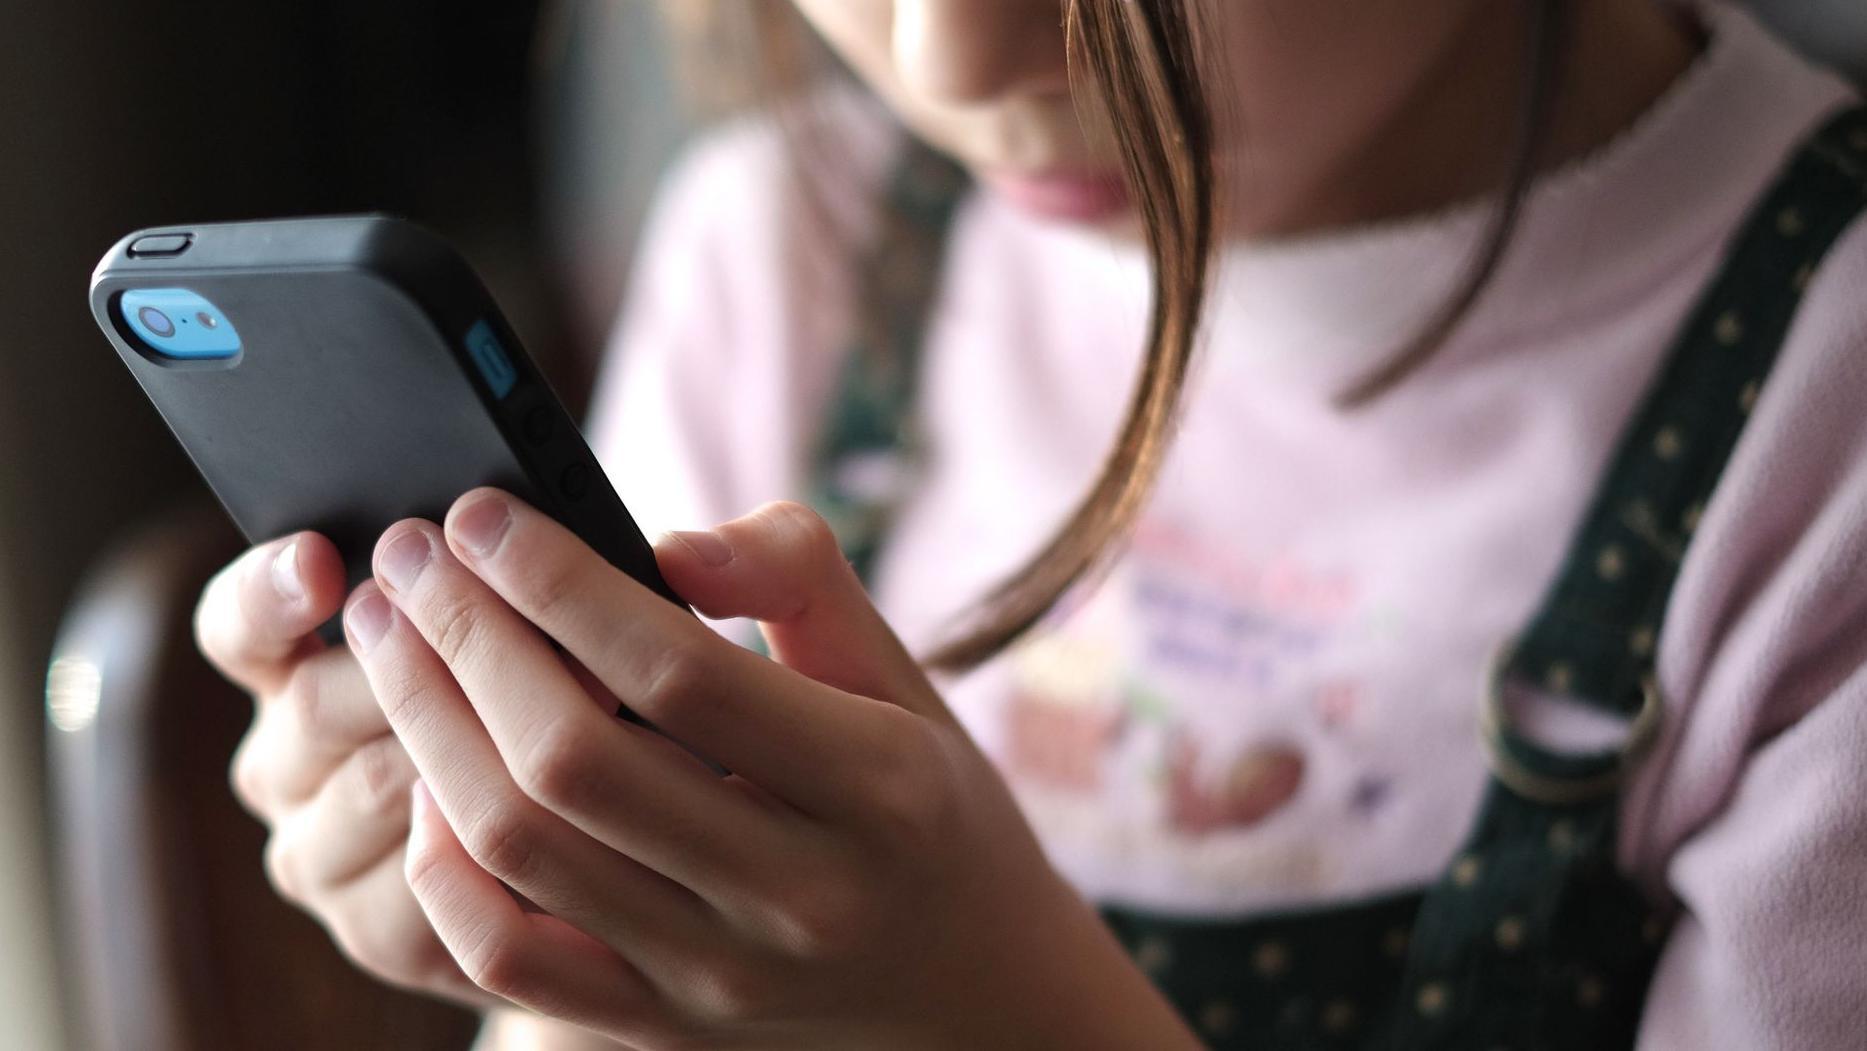 Three-year-olds groomed online, charity warns